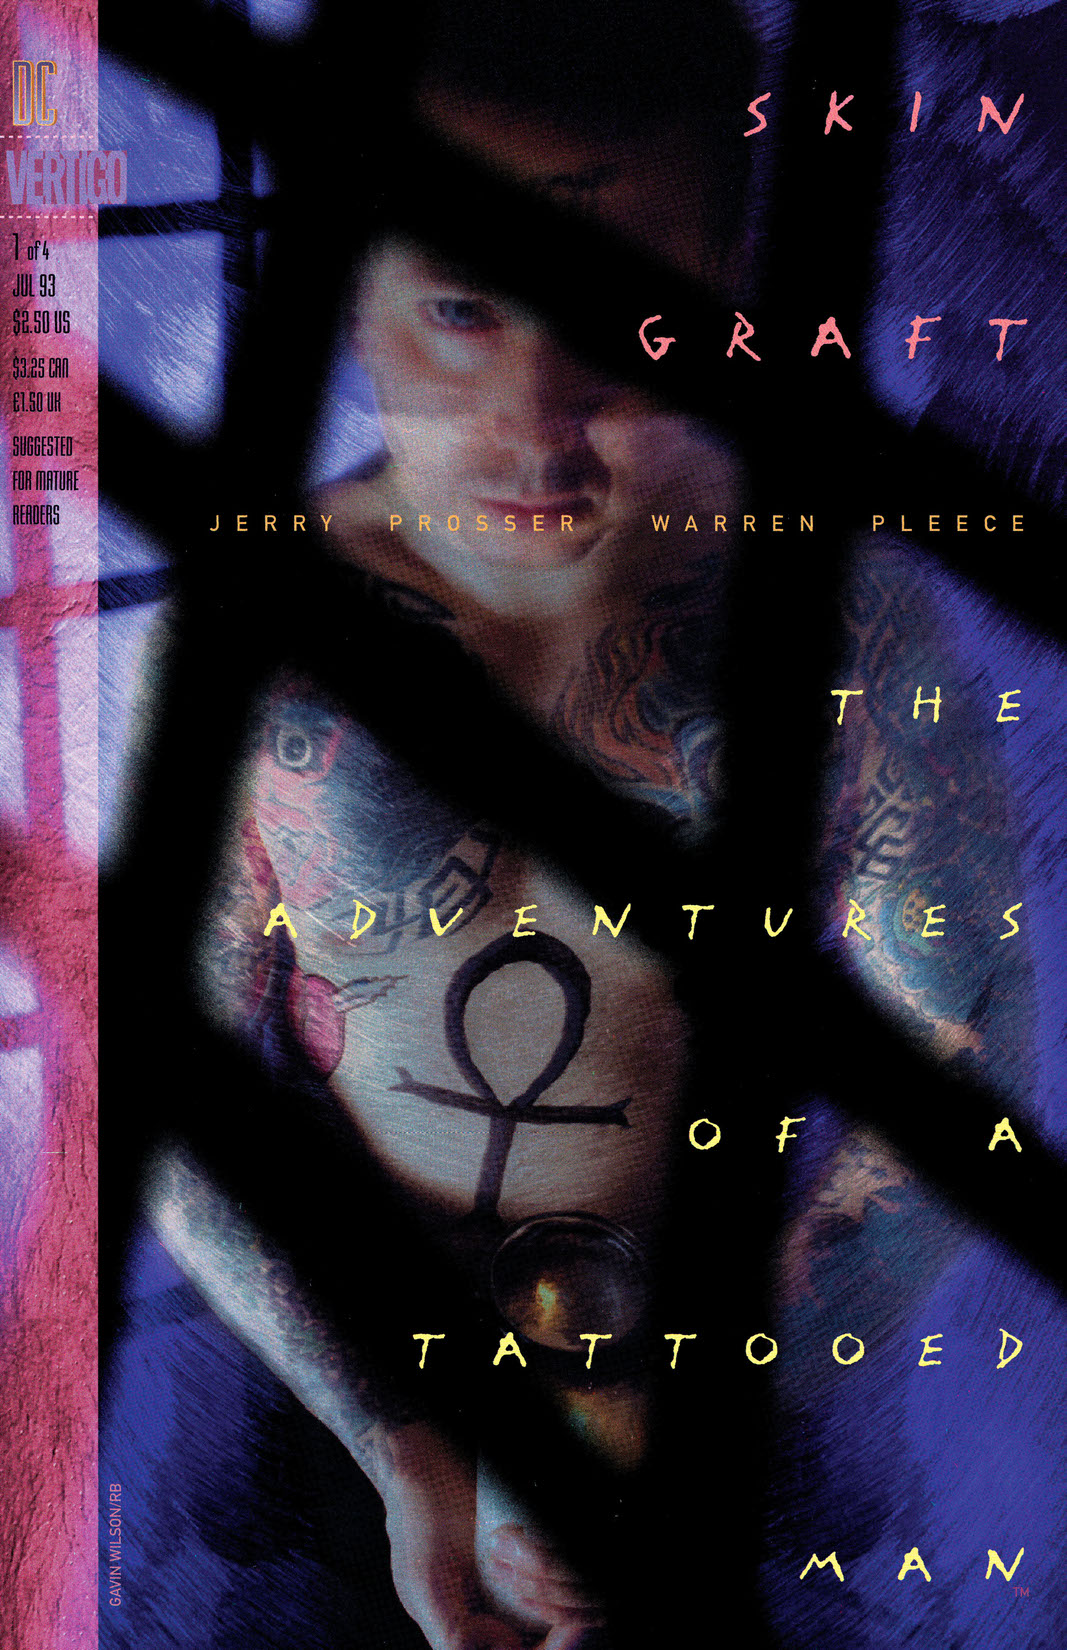 Skin Graft: The Adventures of a Tattooed Man #1 preview images